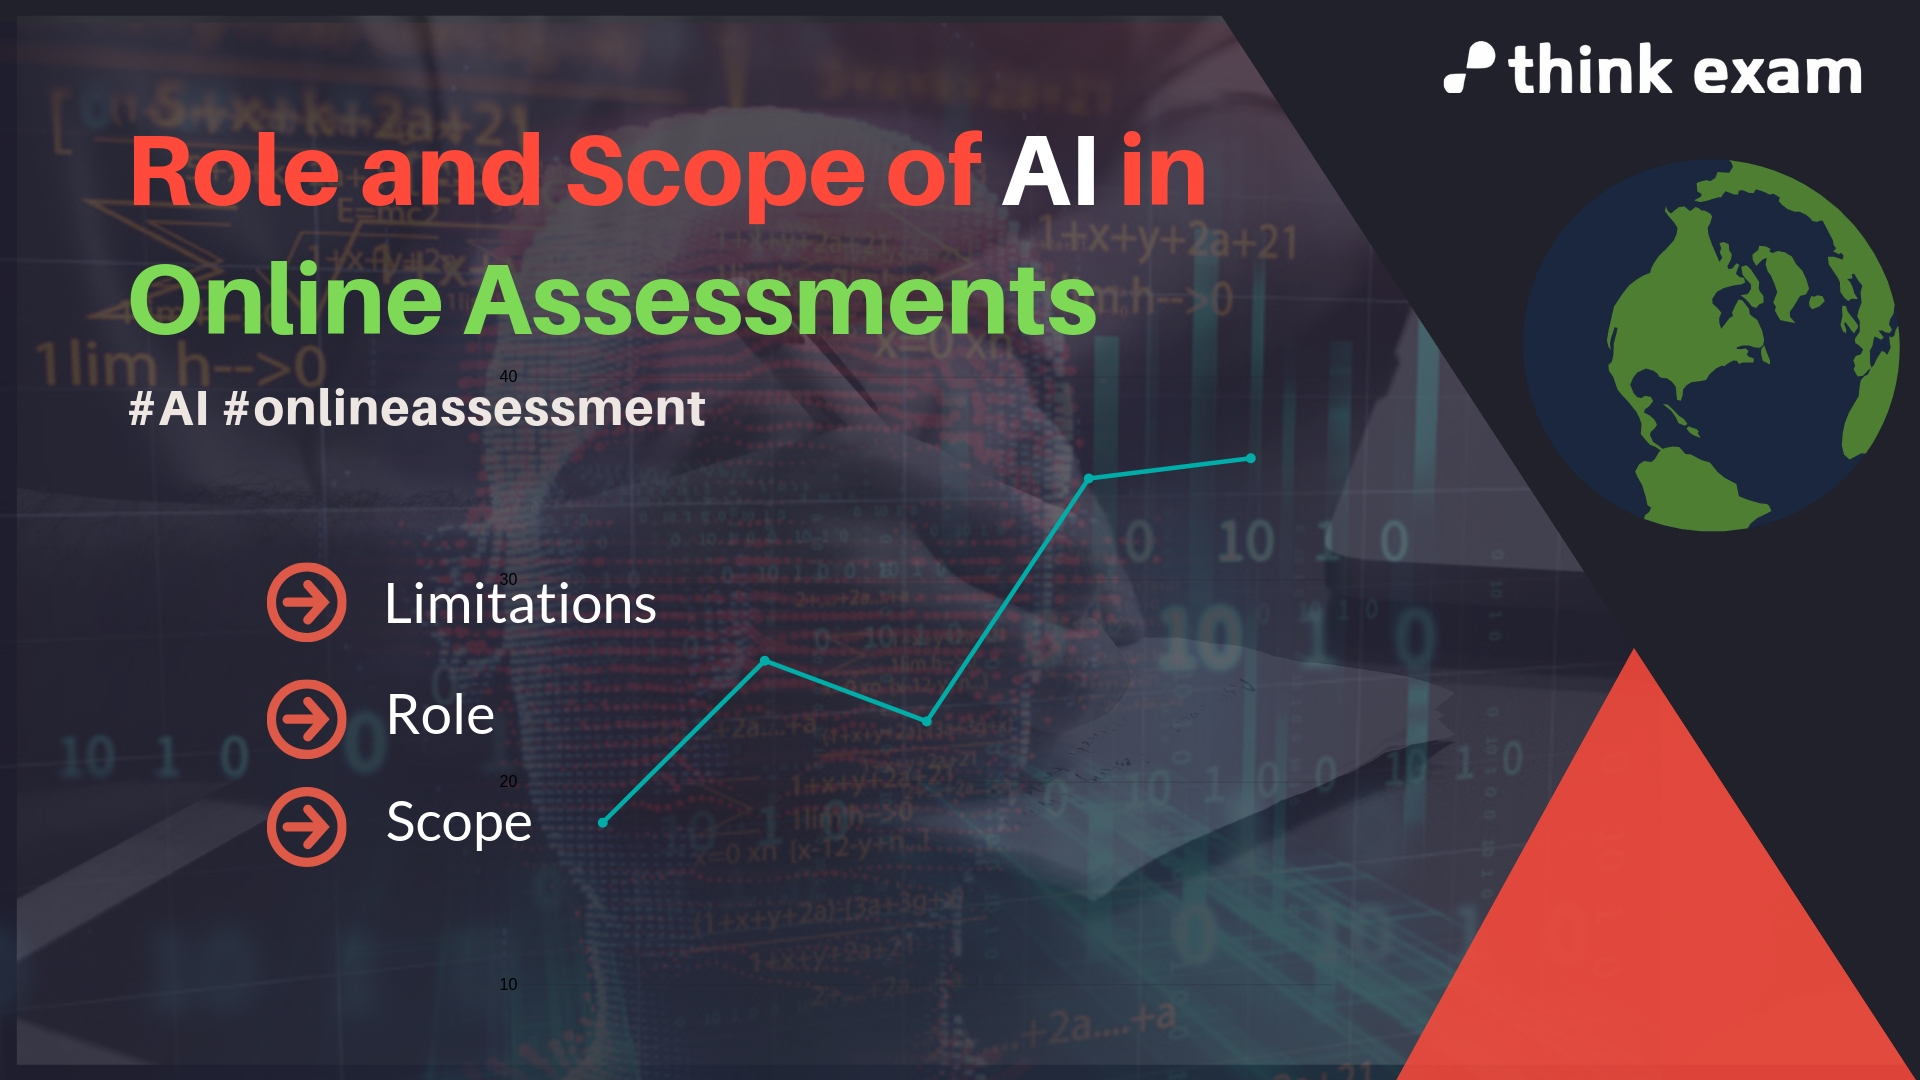 Role-and-Scope-of-AI-in-Online-Assessments.jpg